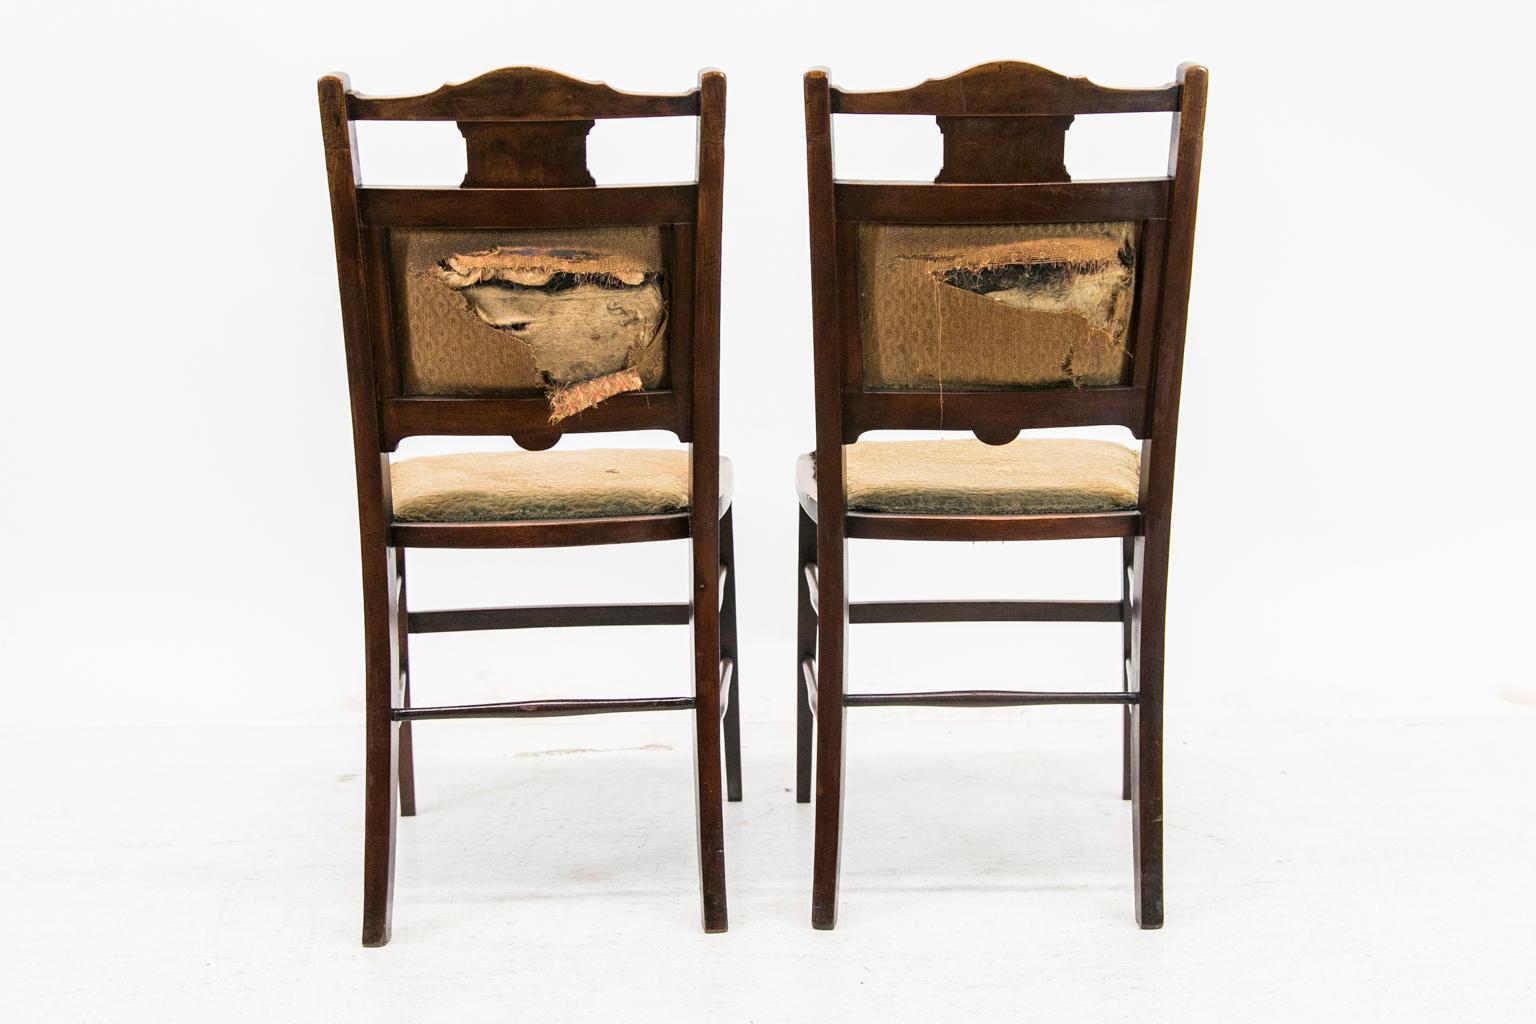 Pair of Inlaid Edwardian Chairs 2